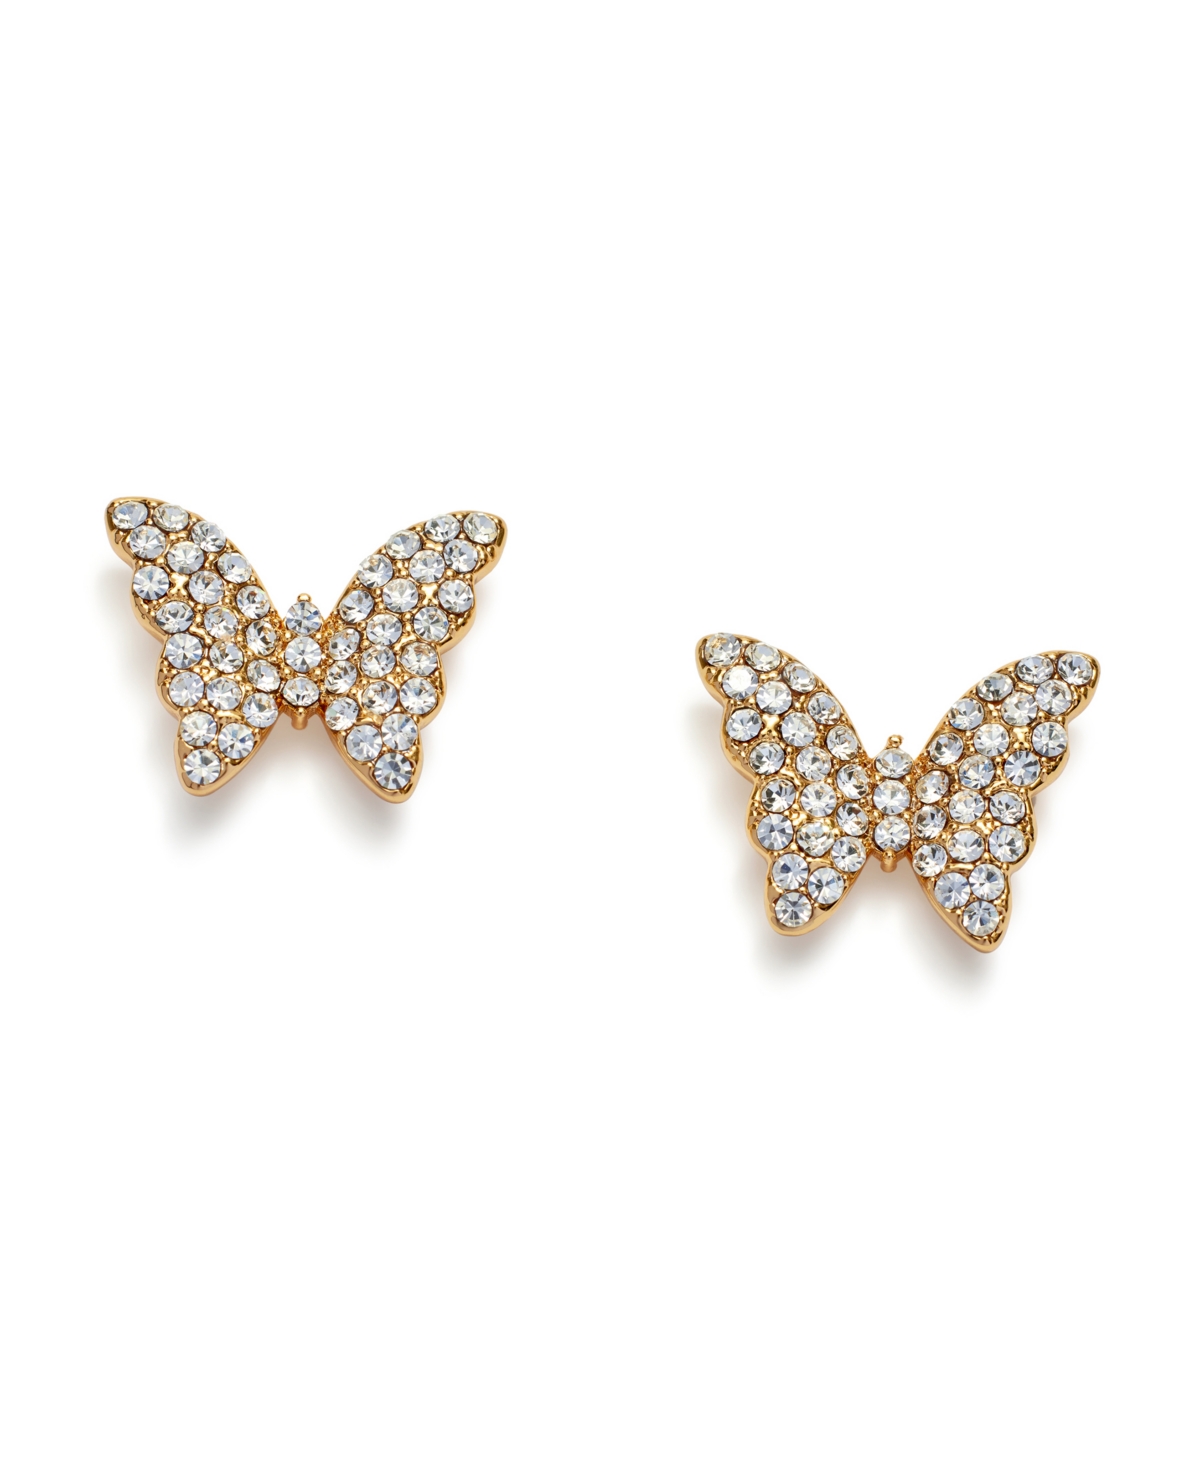 Faux Stone Pave Butterfly Stud Earrings - Crystal, Rhodium